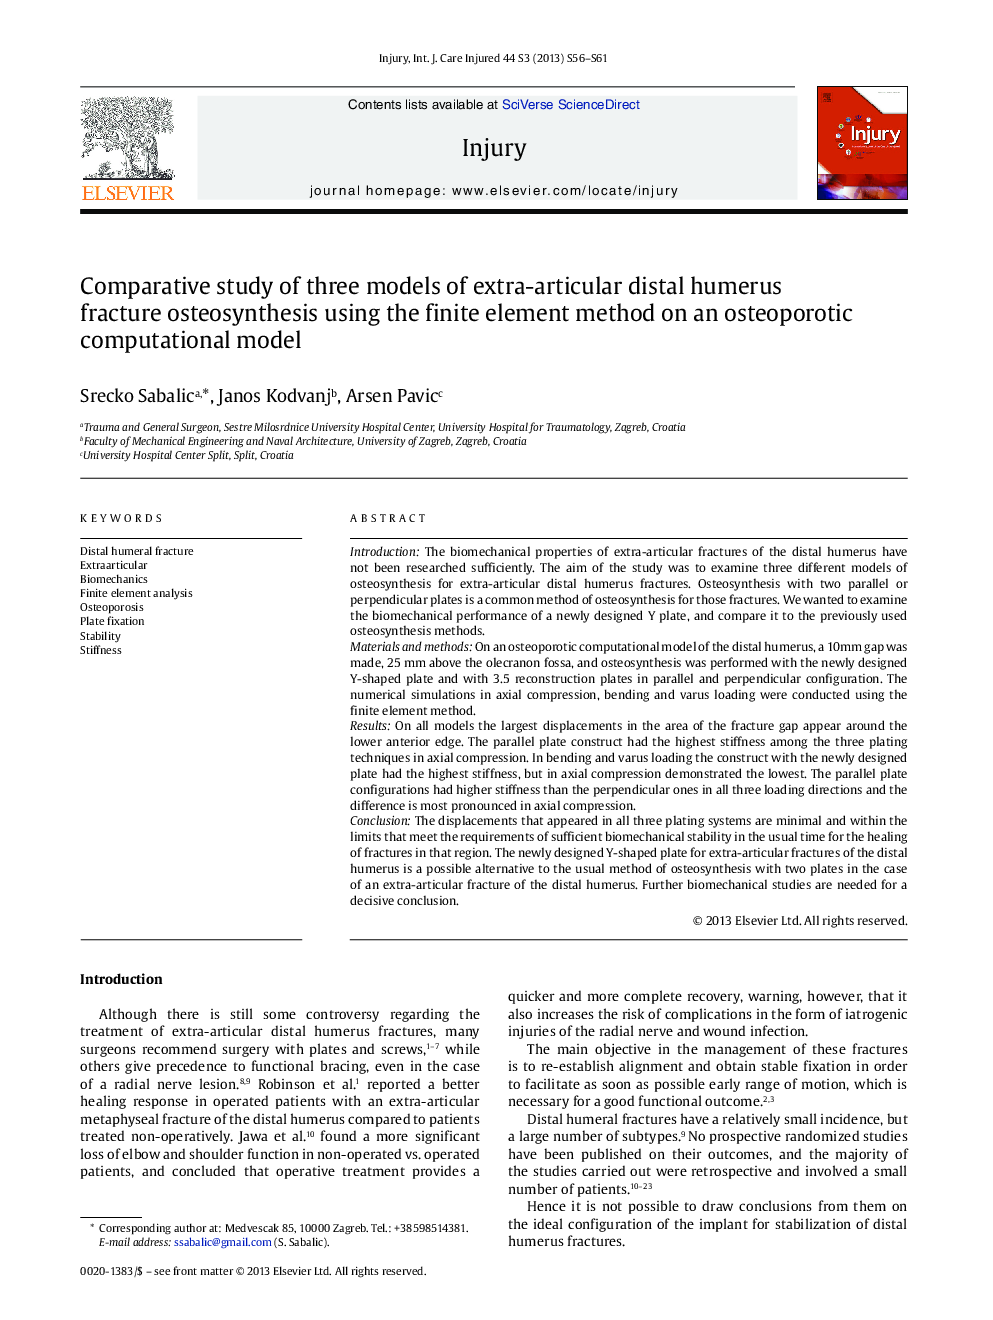 Comparative study of three models of extra-articular distal humerus fracture osteosynthesis using the finite element method on an osteoporotic computational model